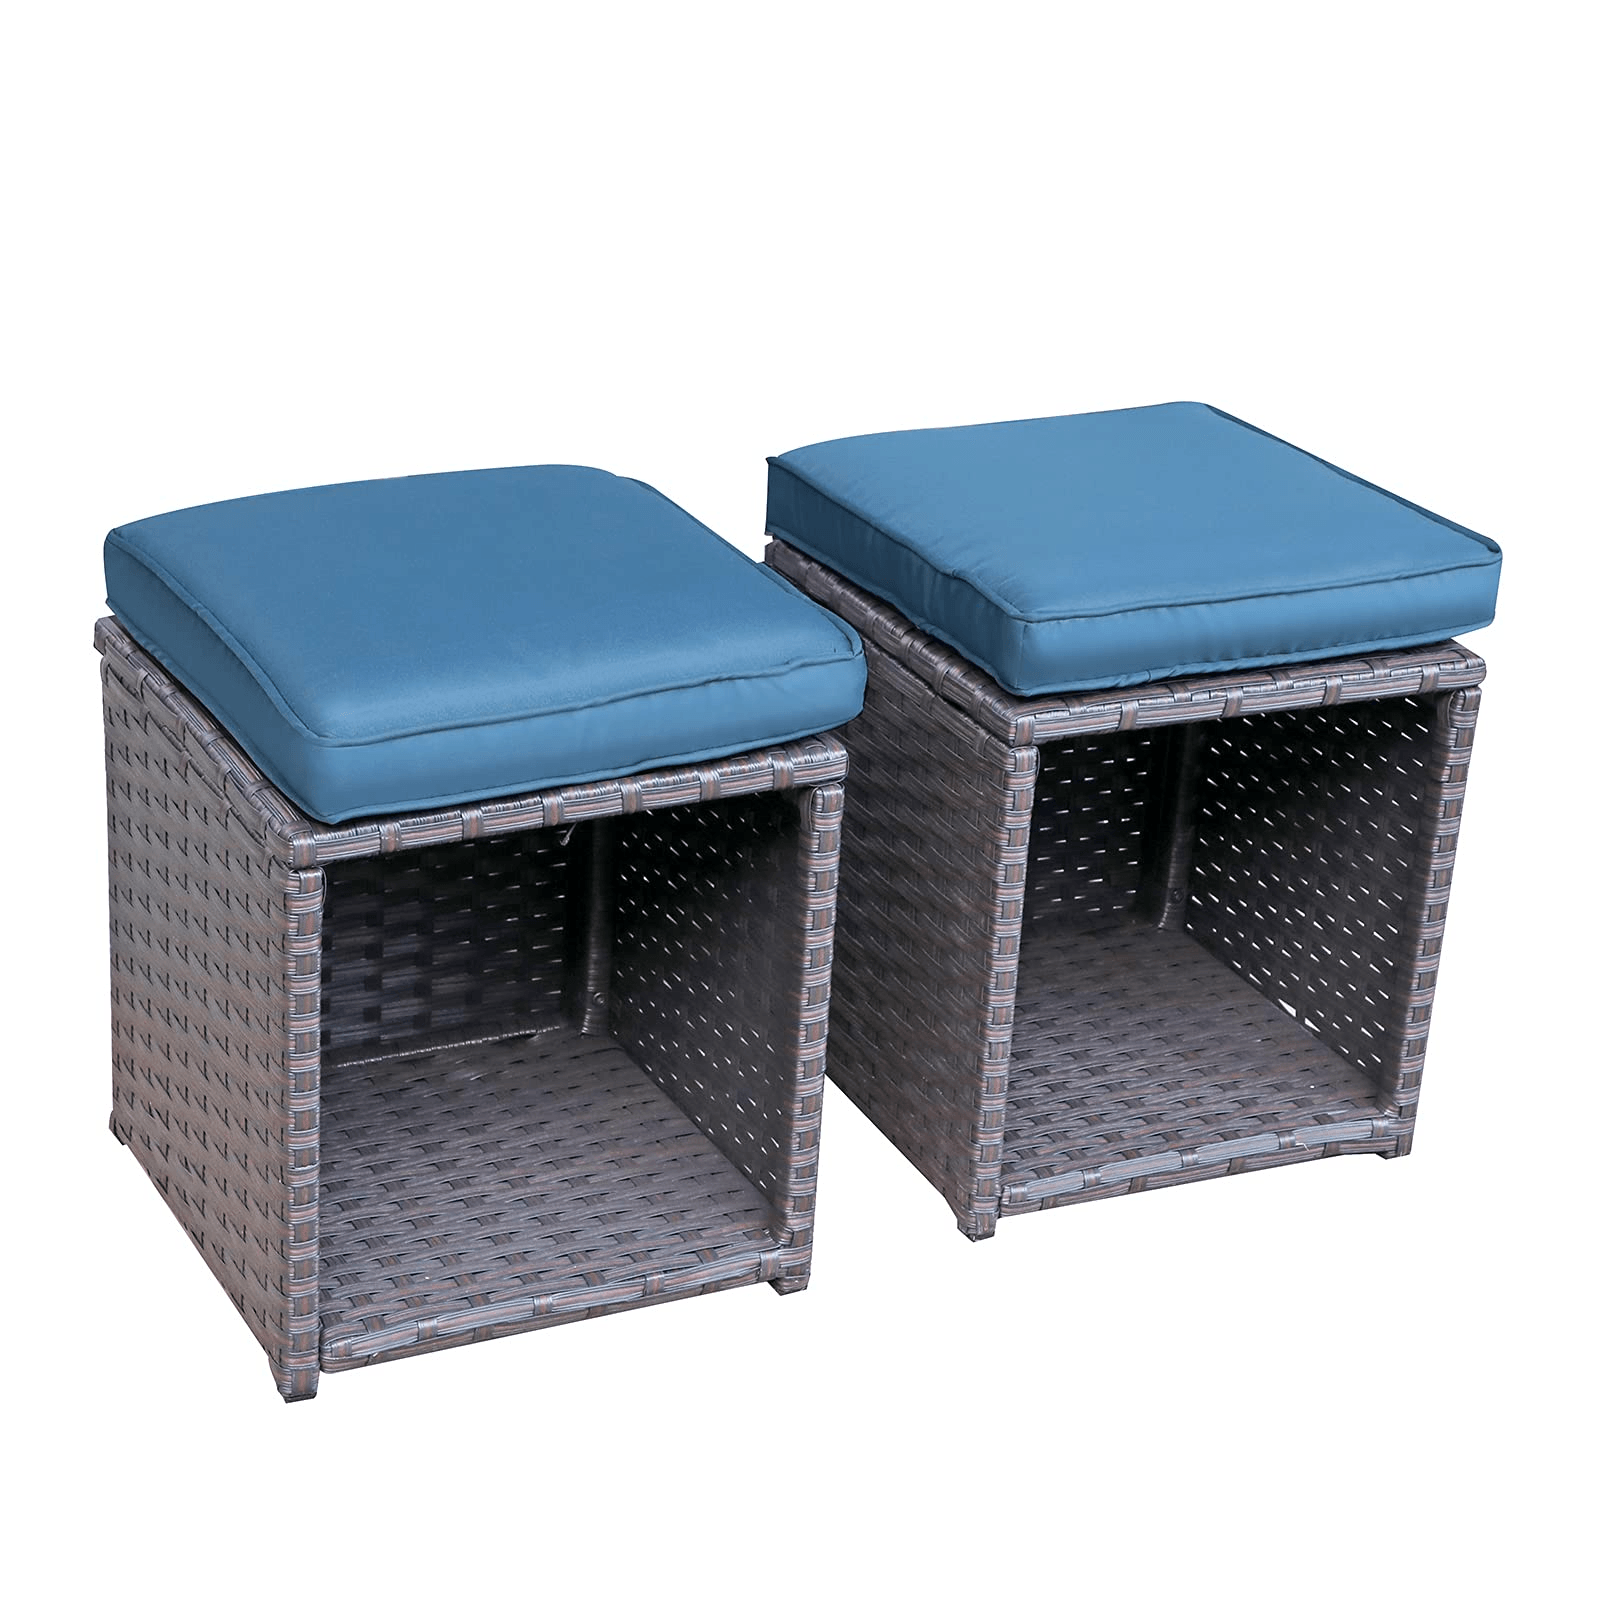 Amberley 2-pc. Outdoor Patio Ottoman, with Storage Space, Aegean Blue - OrangeCasual